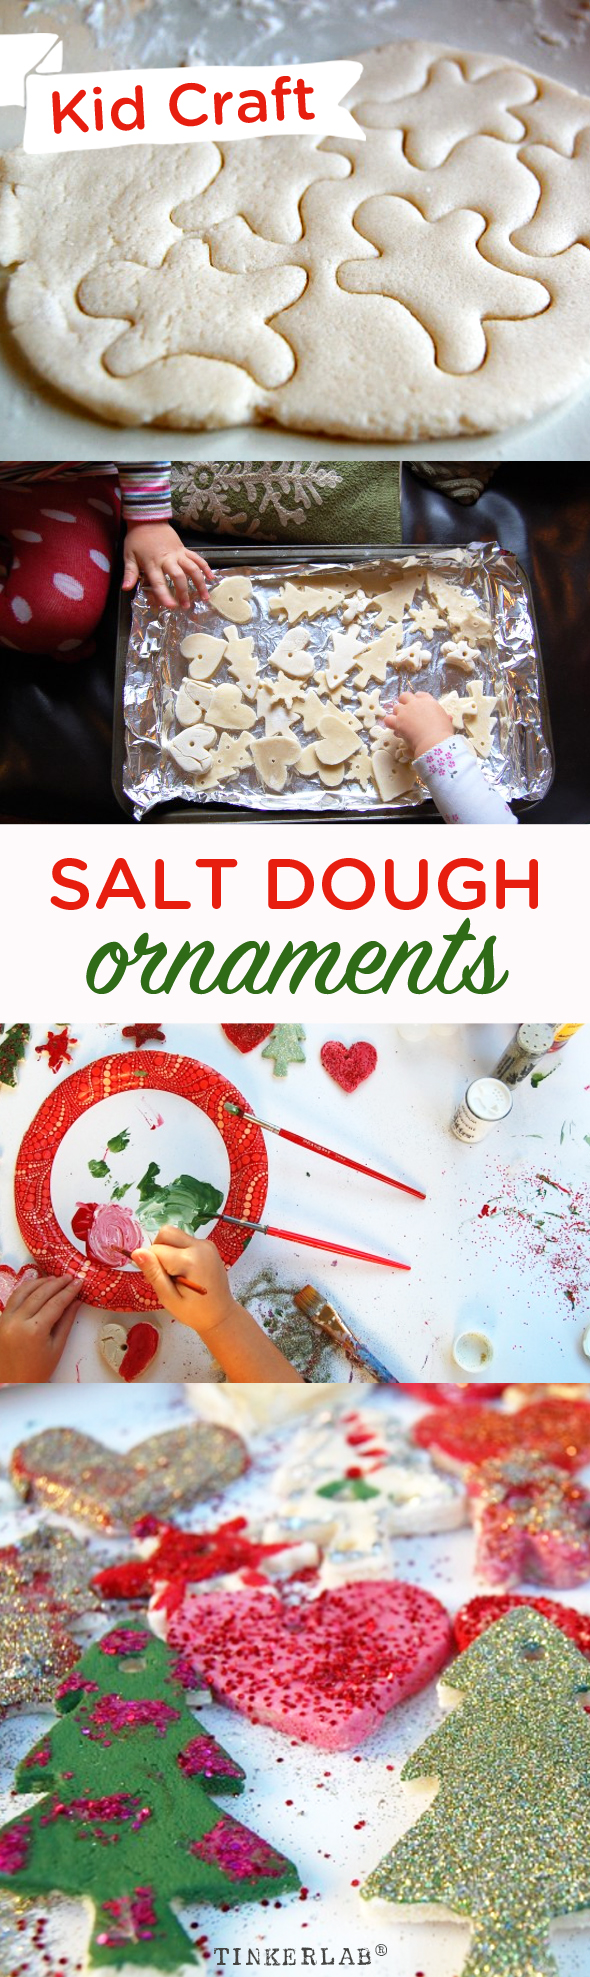 How to make salt dough ornaments with kids | TinkerLab